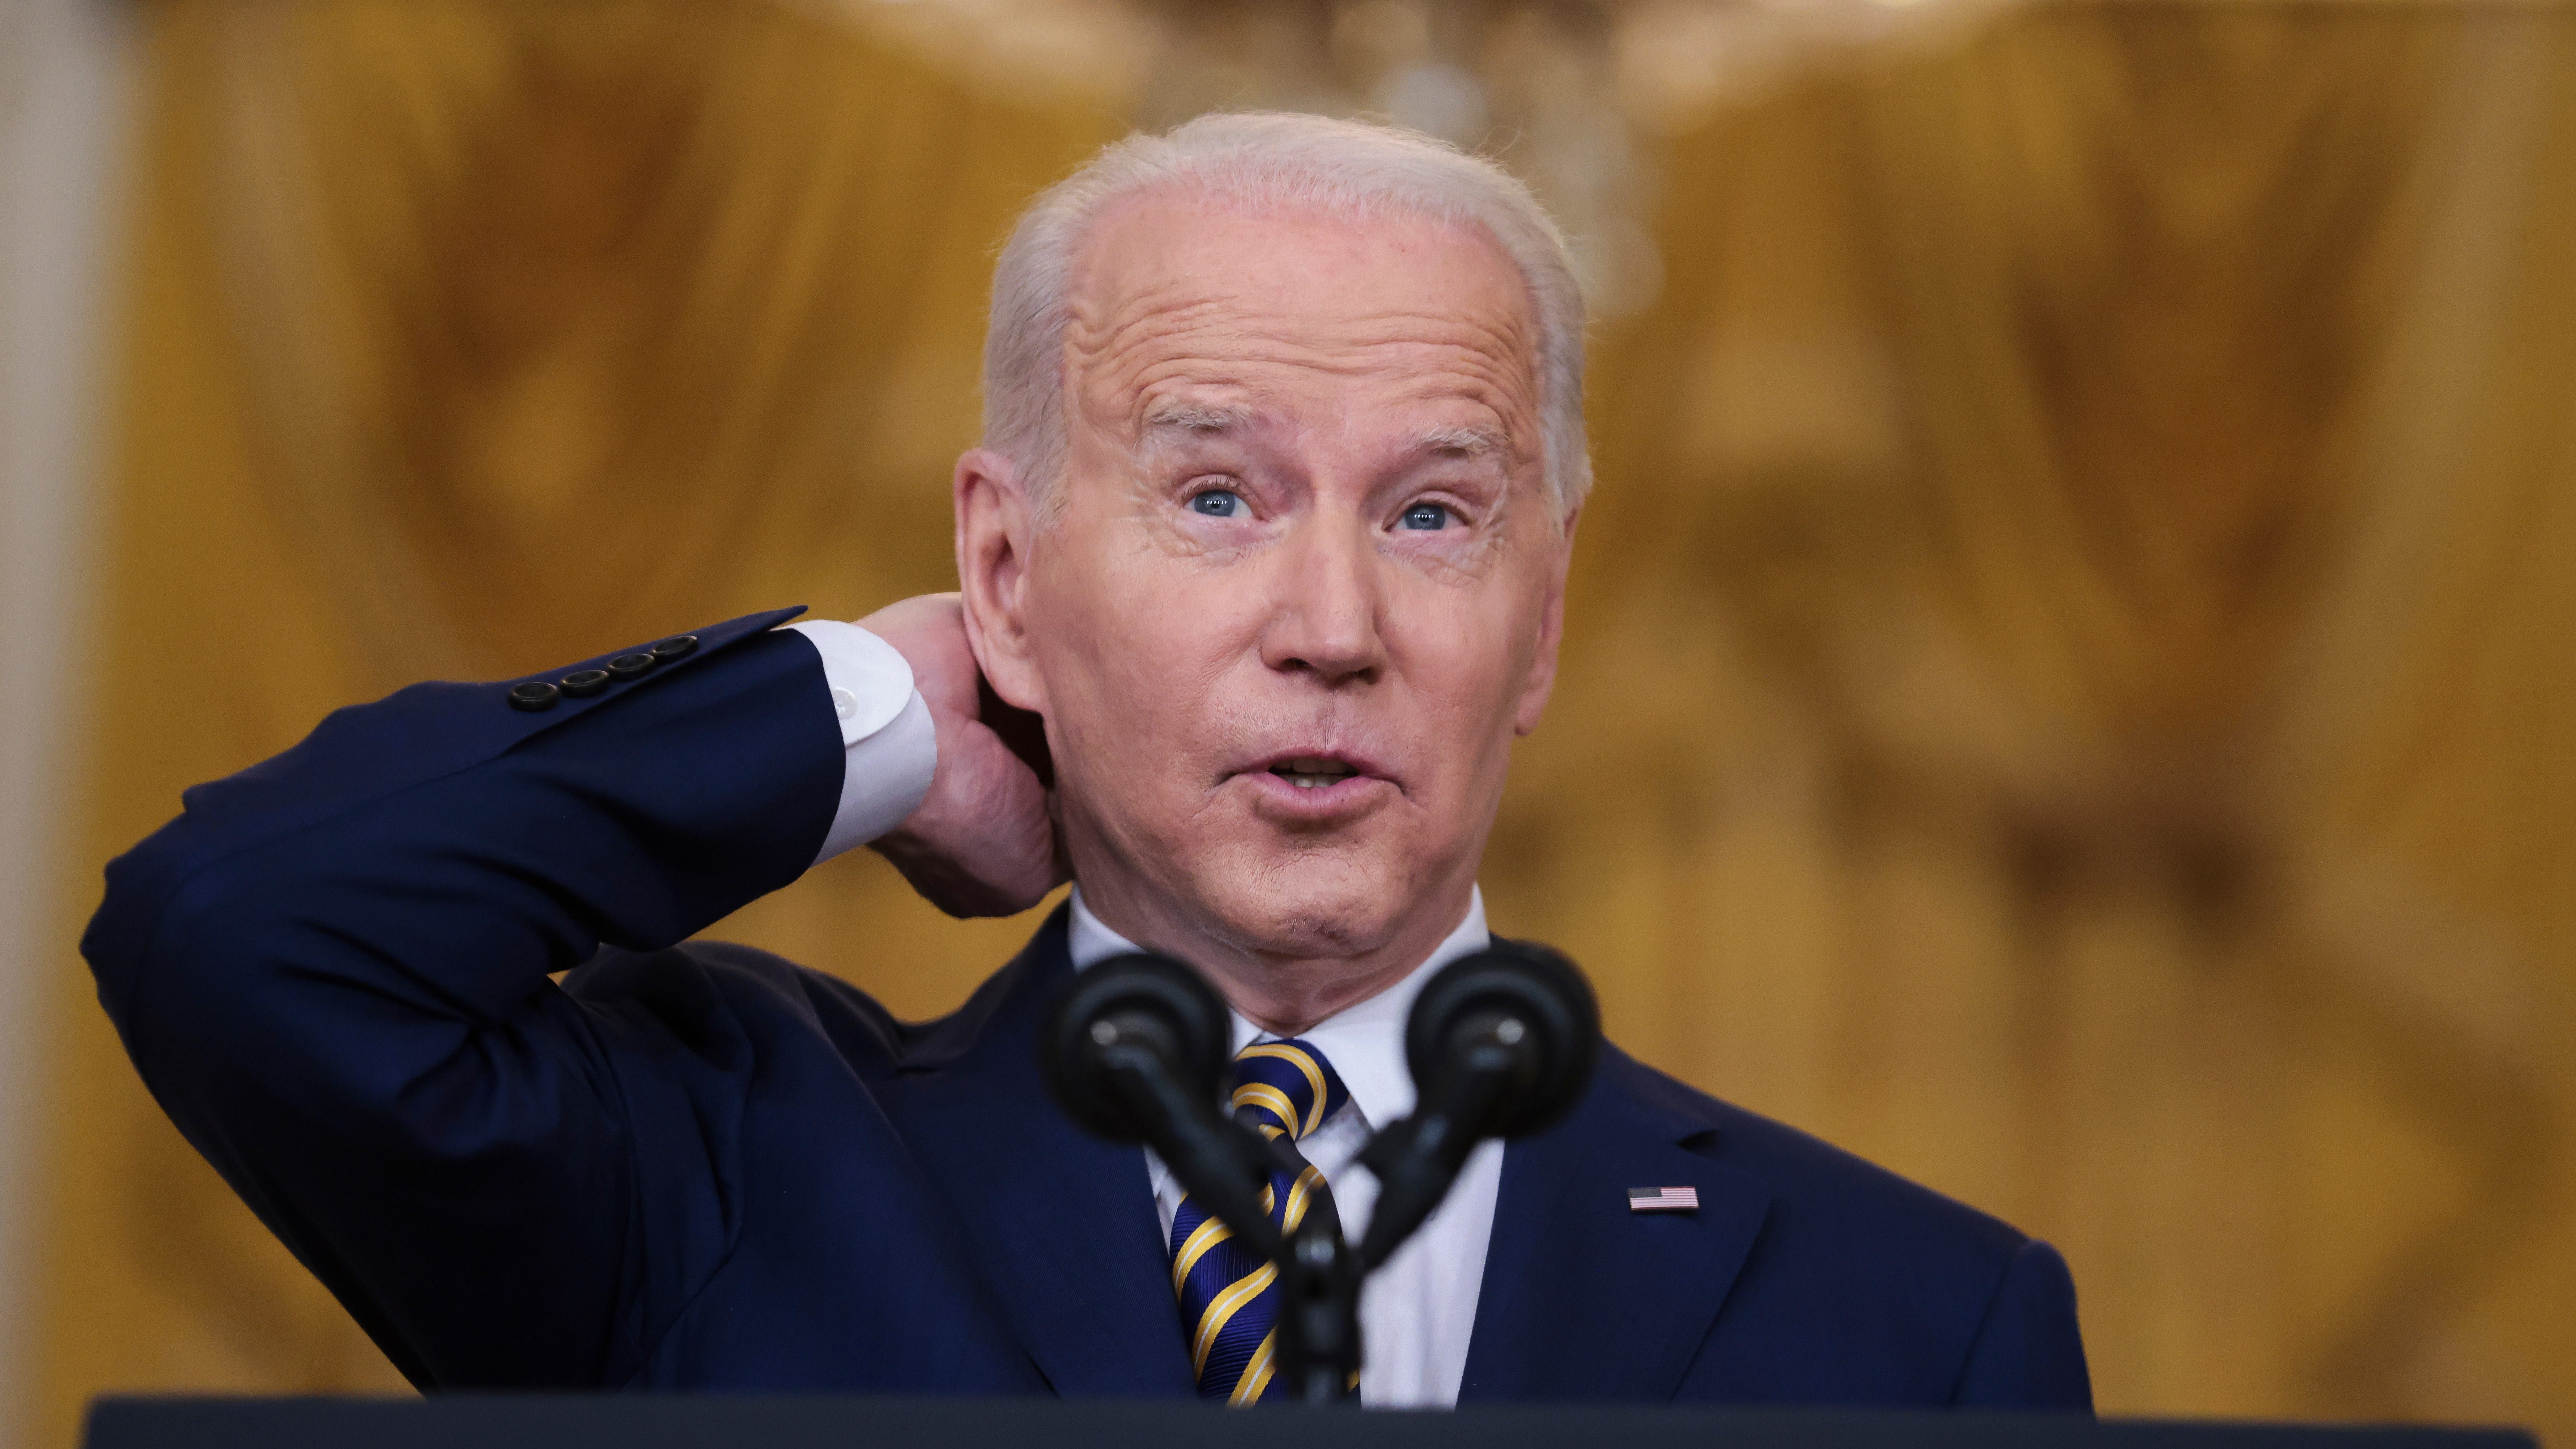 Americans grade President Biden as inflation remains high